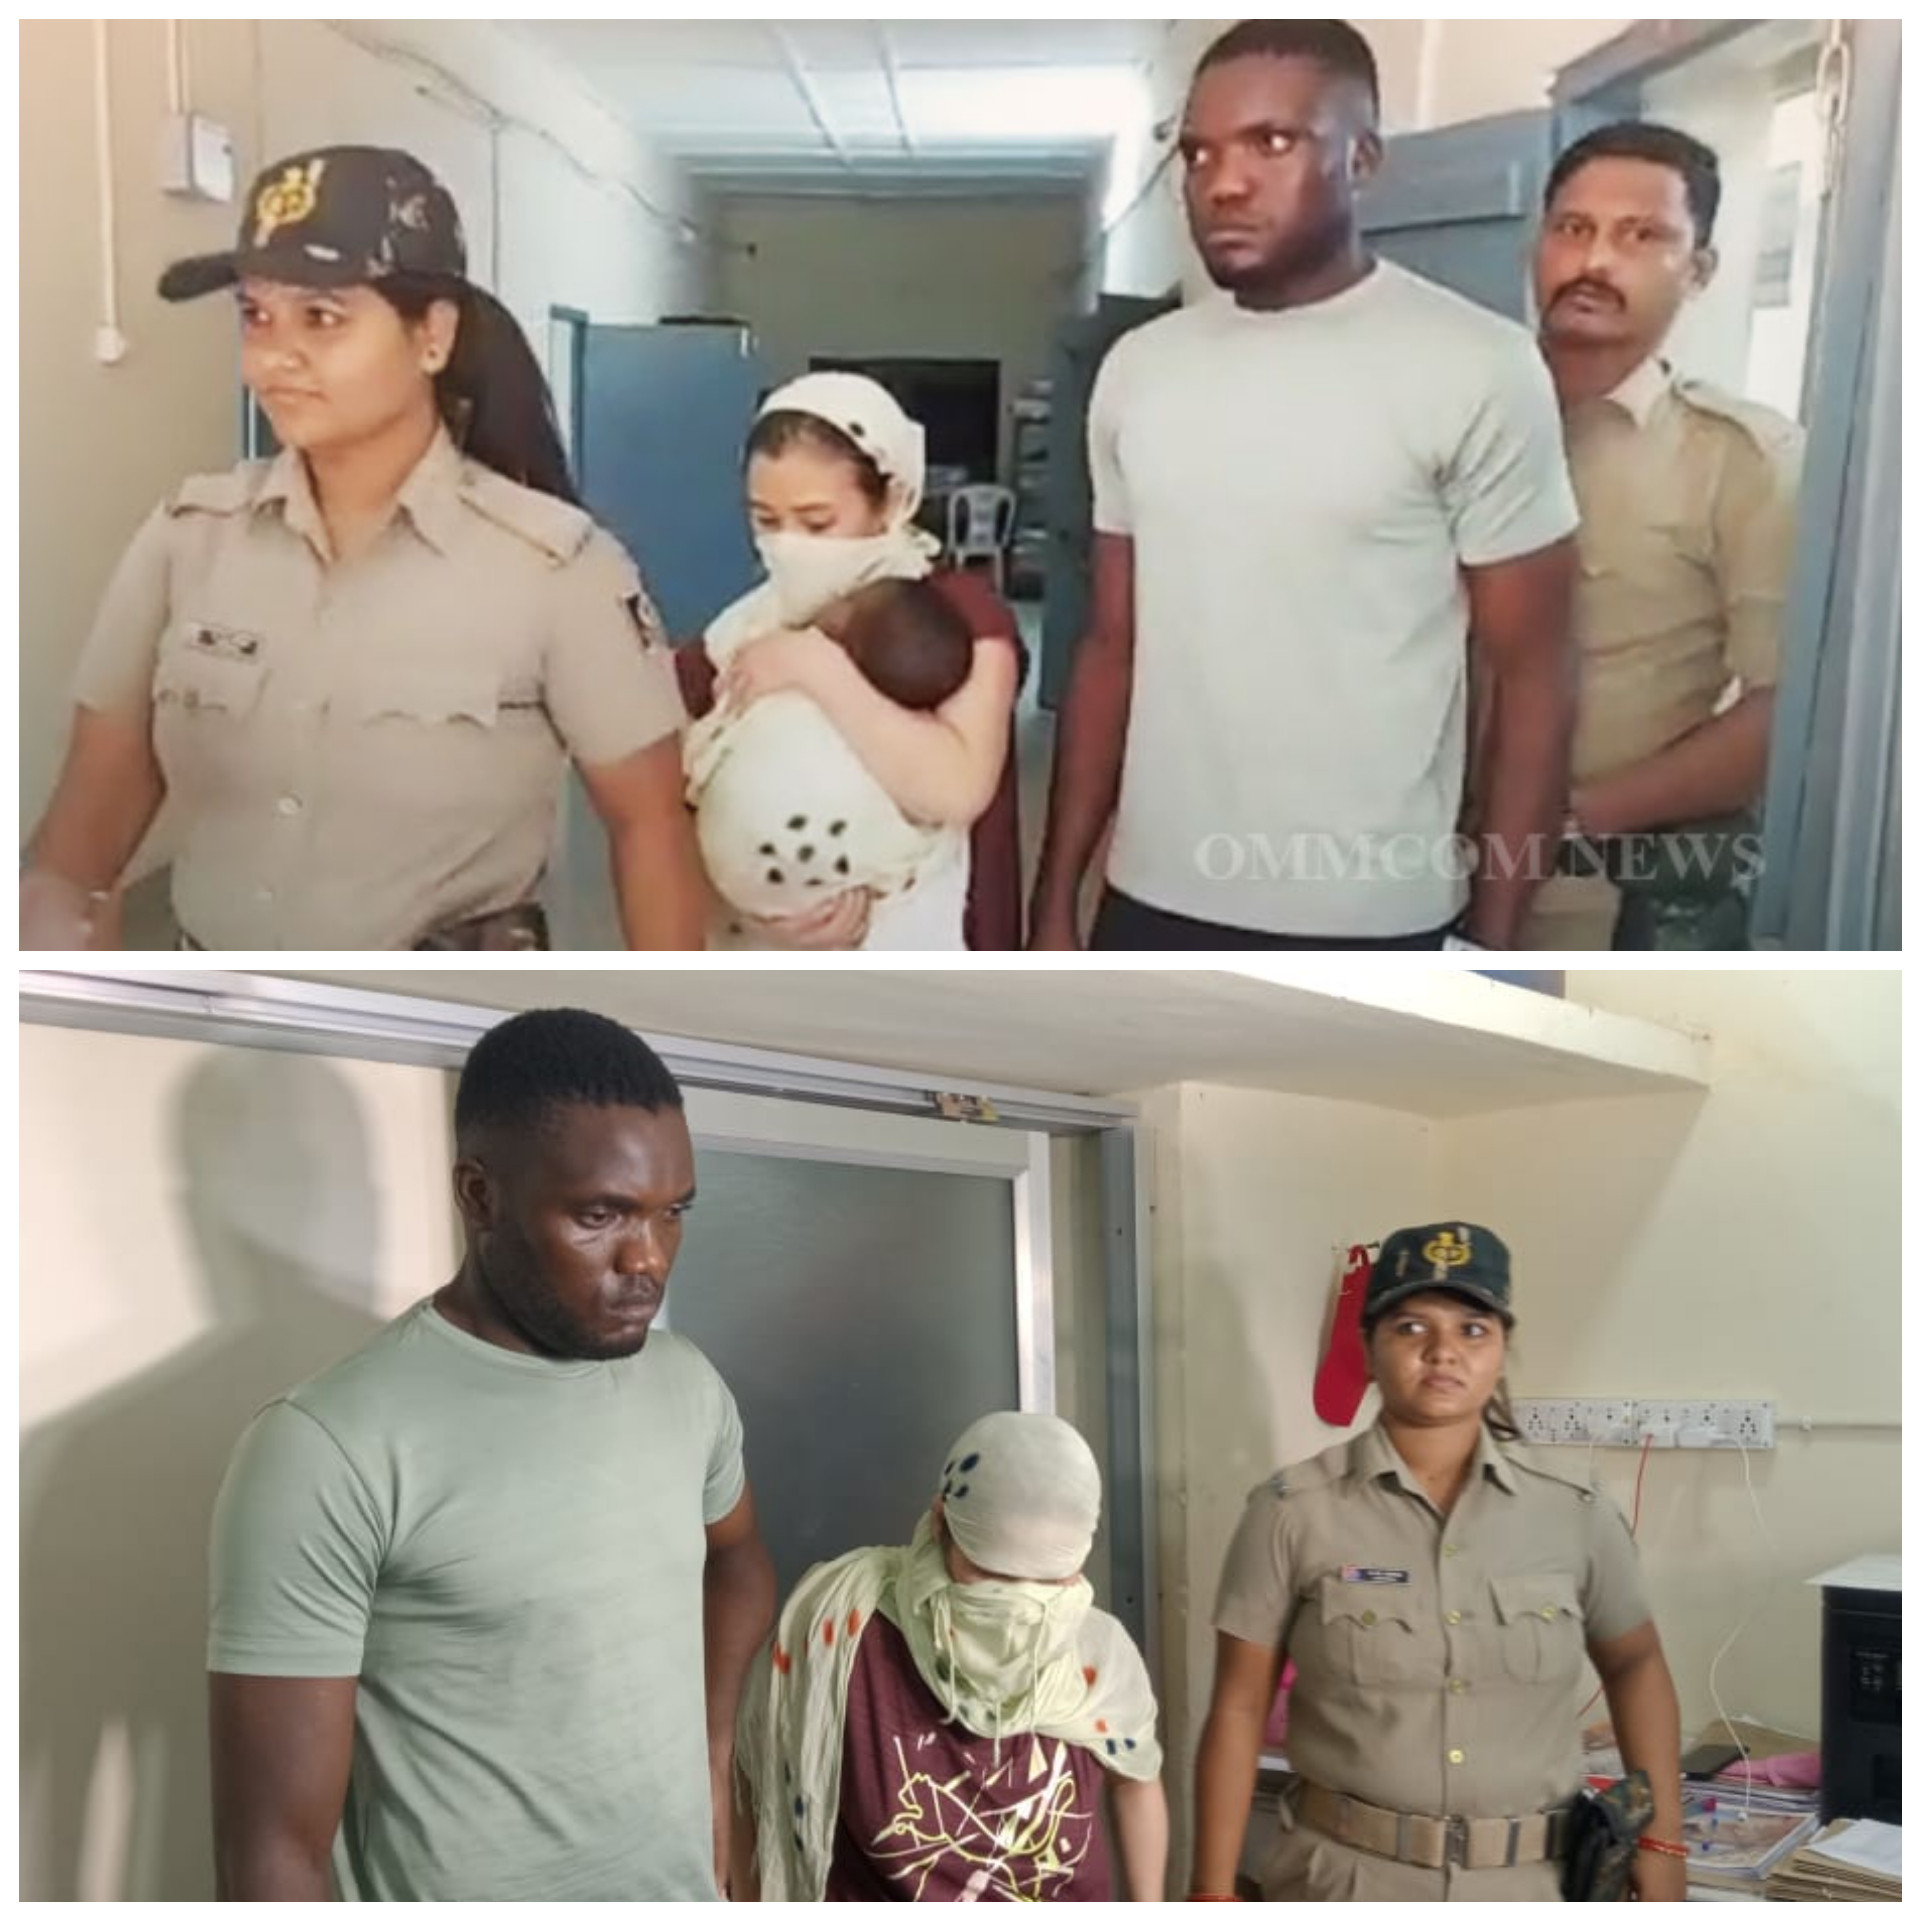 Nigerian man and his Indian wife arrested for allegedly duping government employee of over N15m